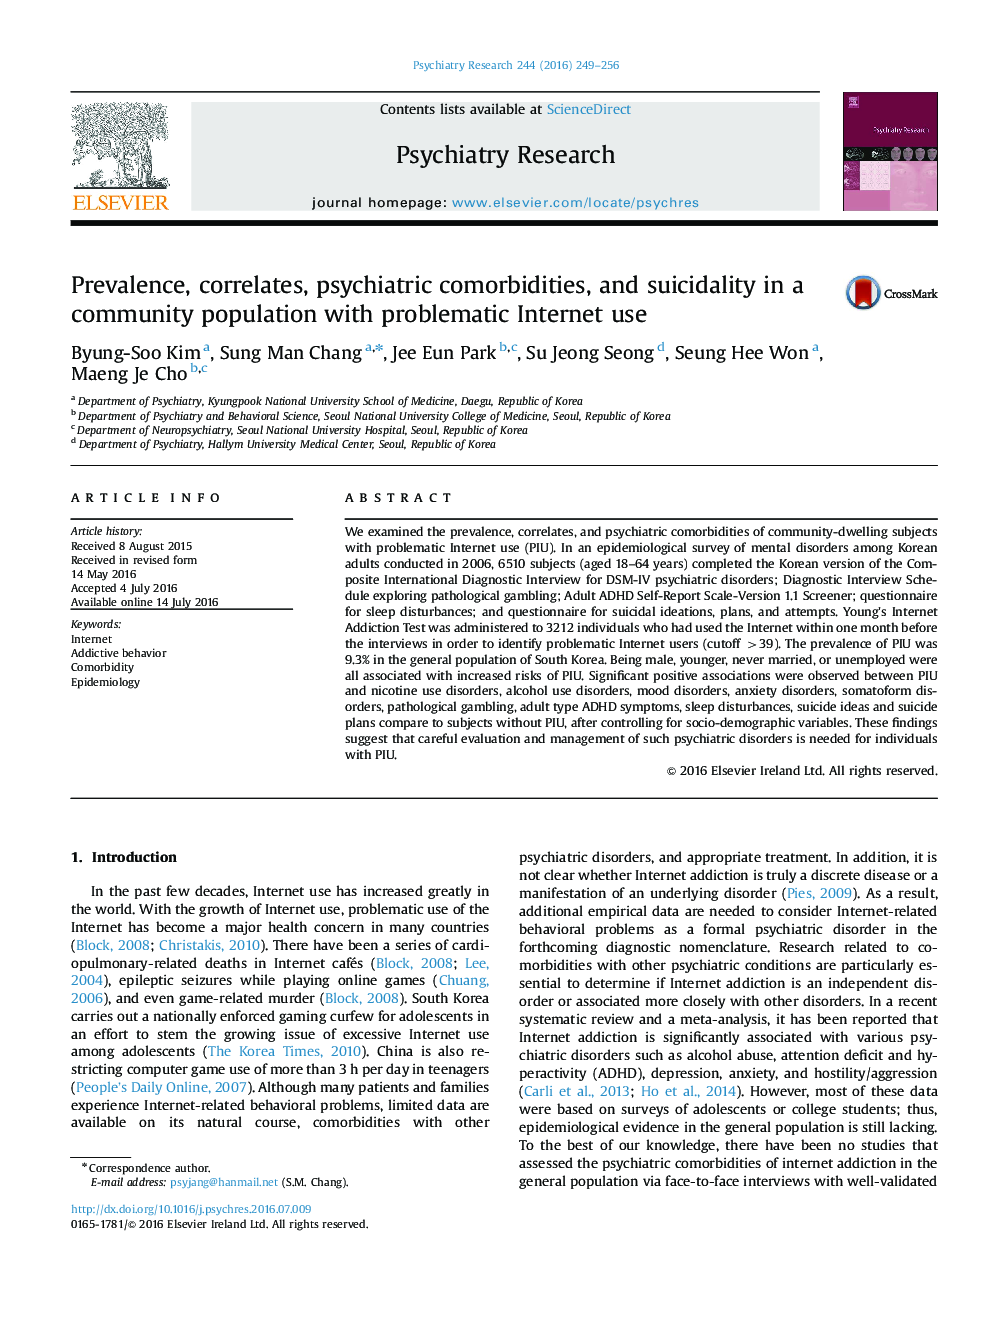 Prevalence, correlates, psychiatric comorbidities, and suicidality in a community population with problematic Internet use